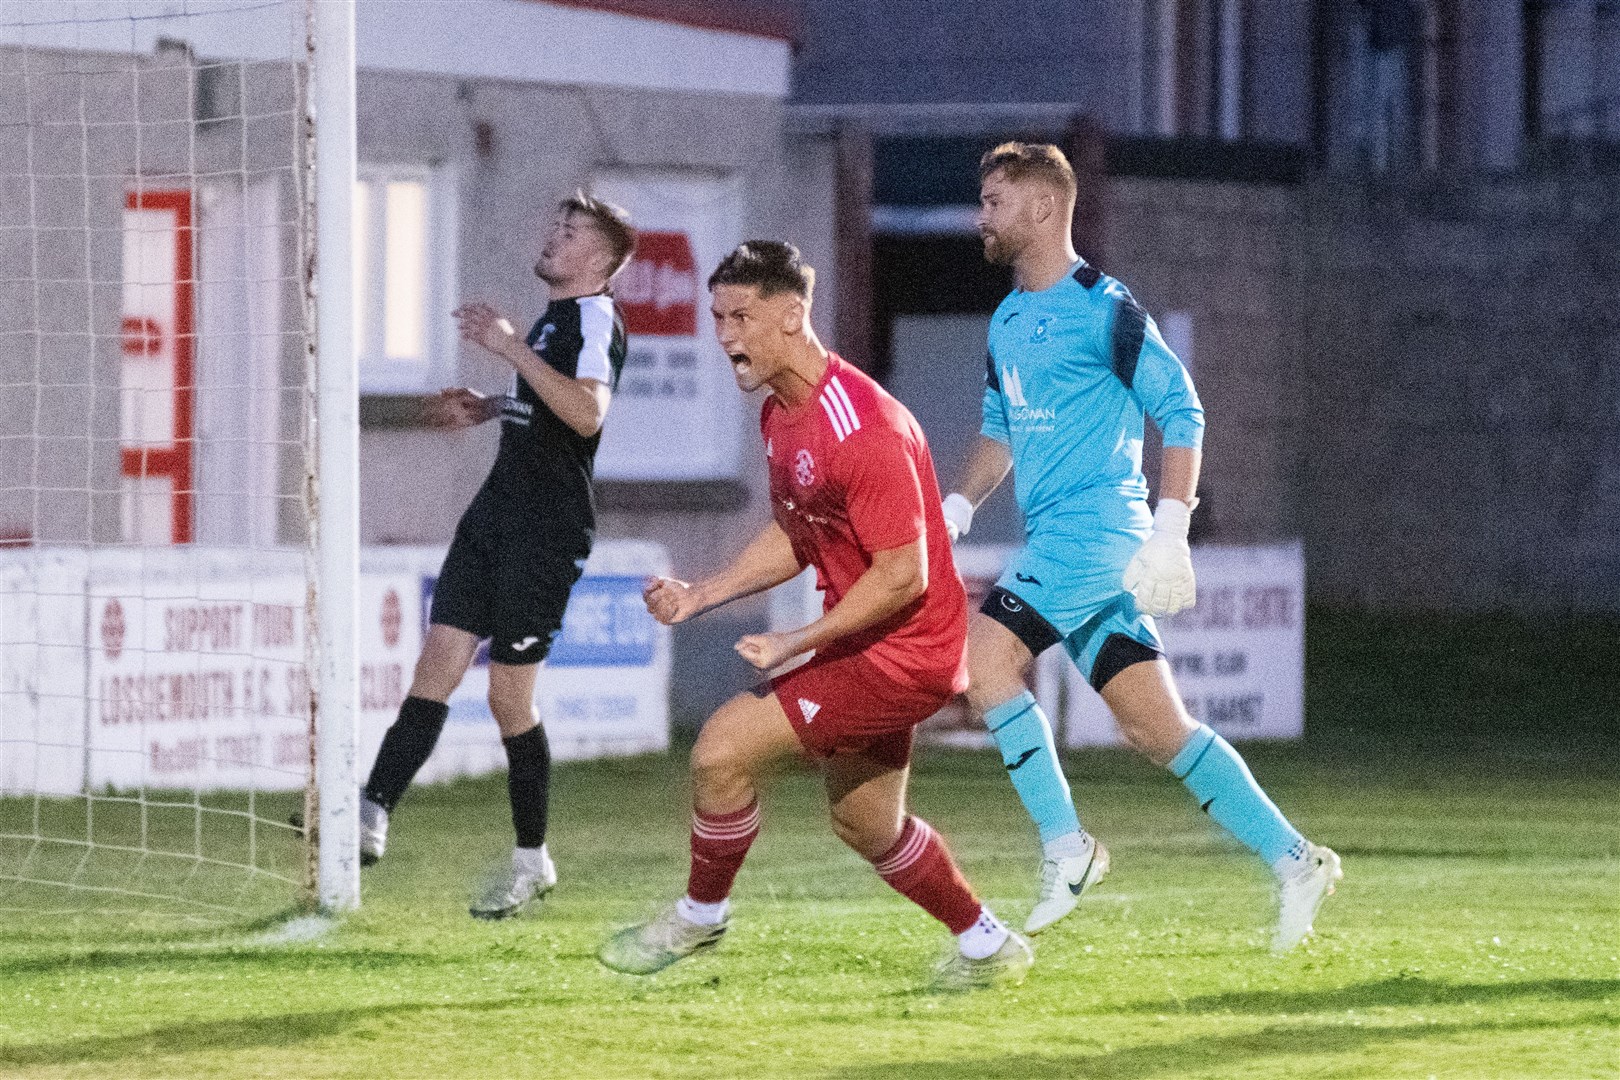 A roar of delight from Lossiemouth winger Ross Elliott as he scores the Coasters second goal of the evening...Lossiemouth FC (4) vs Strathspey Thistle (2) - Highland Football League 22/23 - Grant Park, Lossiemouth 24/08/2022...Picture: Daniel Forsyth..